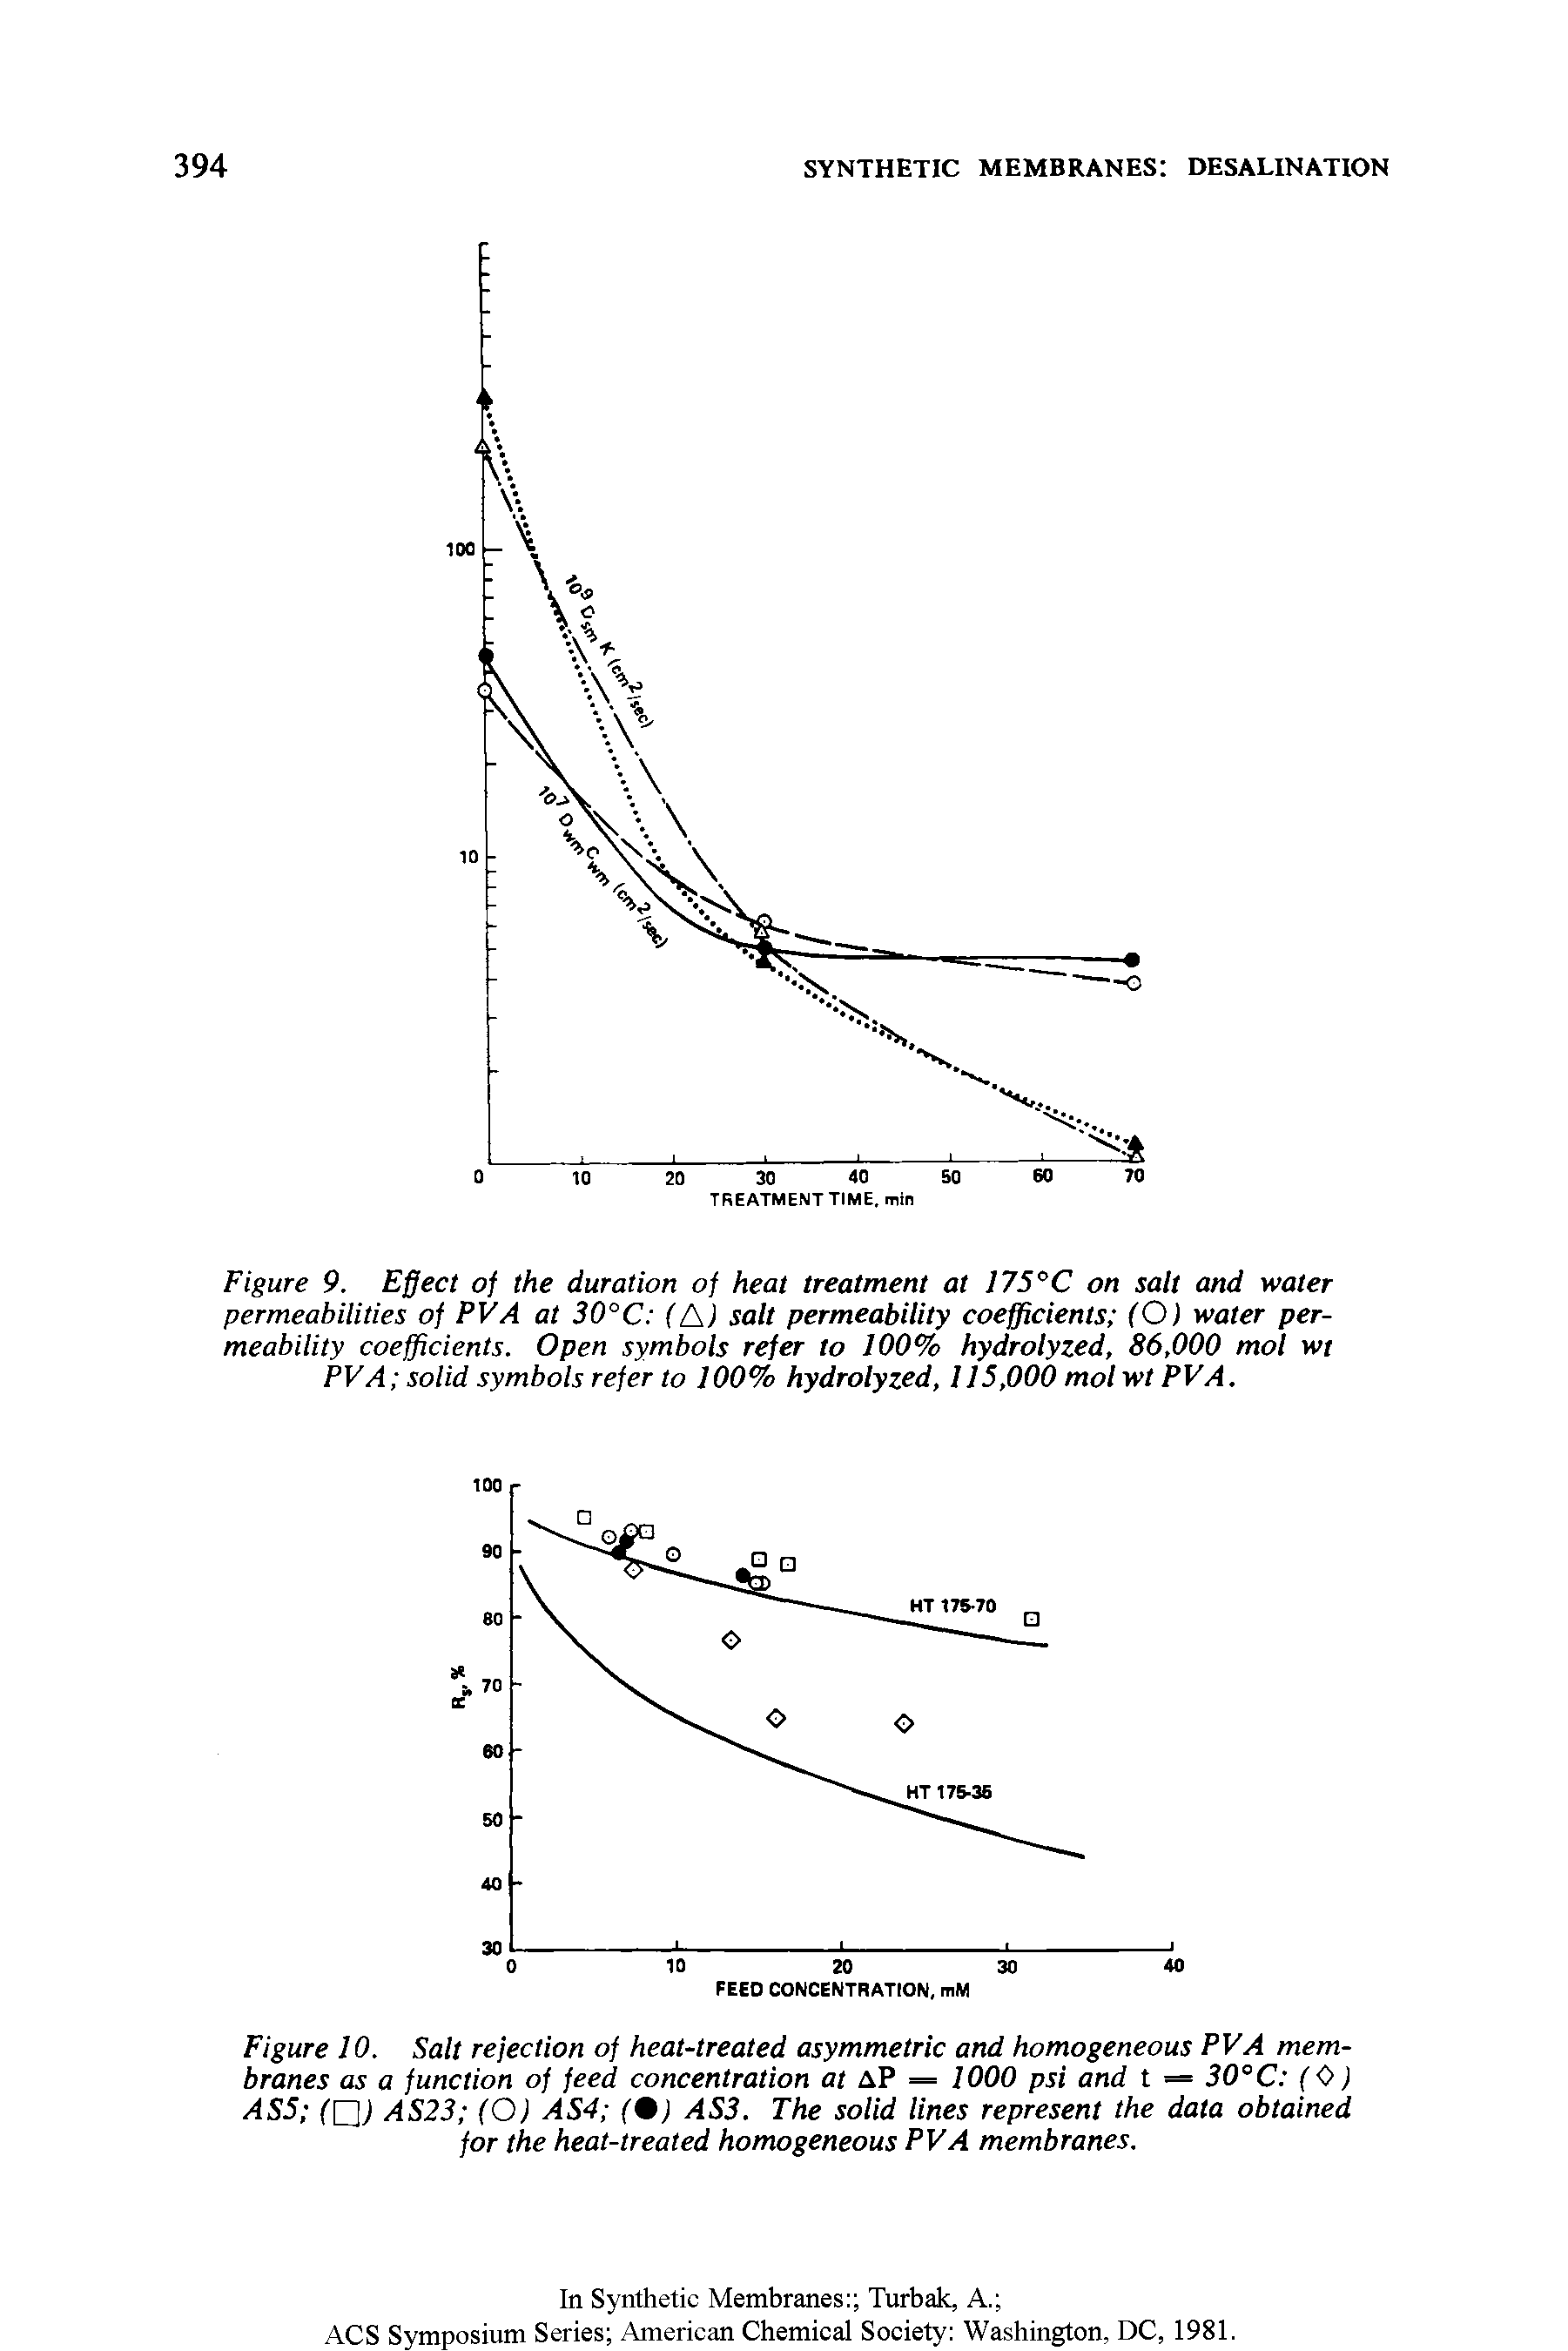 Figure 10. Salt rejection of heat-treated asymmetric and homogeneous PVA membranes as a function of feed concentration at aP = 1000 psi and t = 30°C ( <>) ASS ( J AS23 (O) AS4 (9) AS3. The solid lines represent the data obtained for the heat-treated homogeneous PVA membranes.